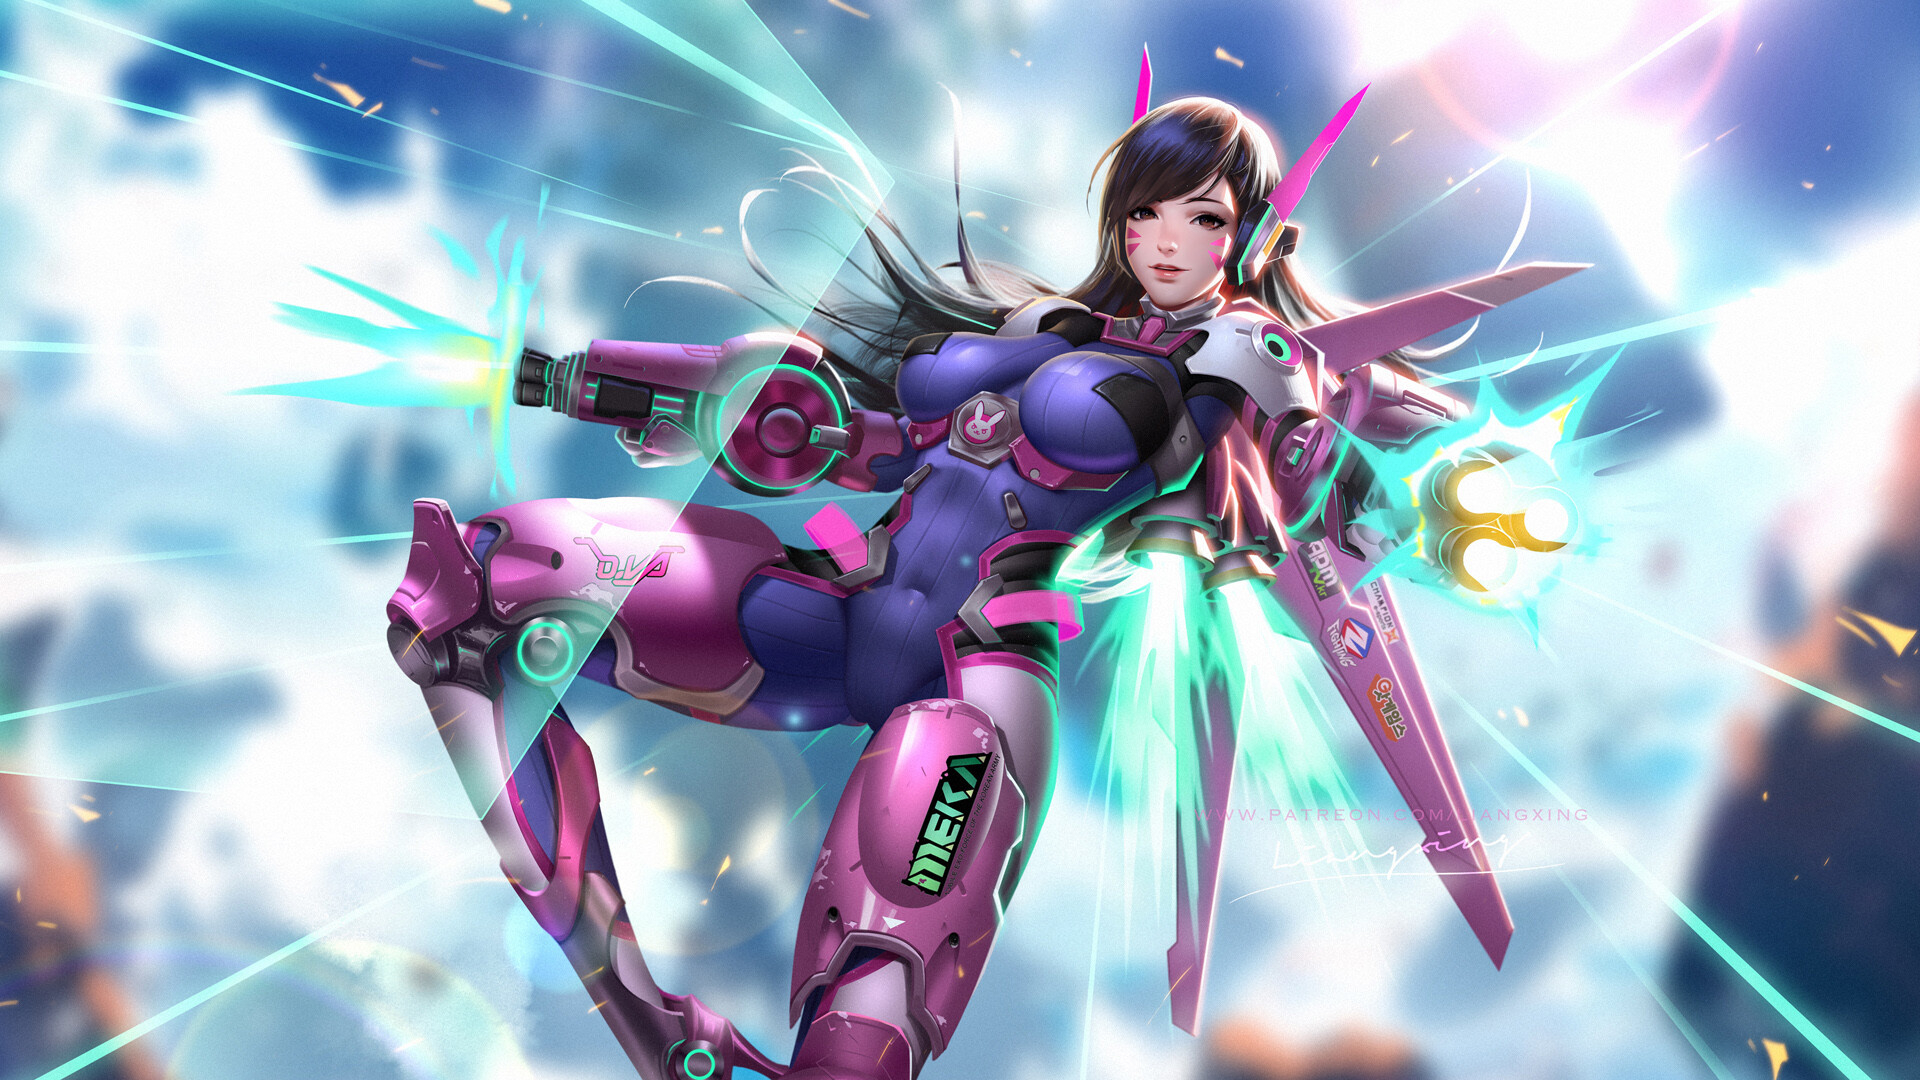 19x1080 Overwatch Dva 1080p Laptop Full Hd Wallpaper Hd Anime 4k Wallpapers Images Photos And Background